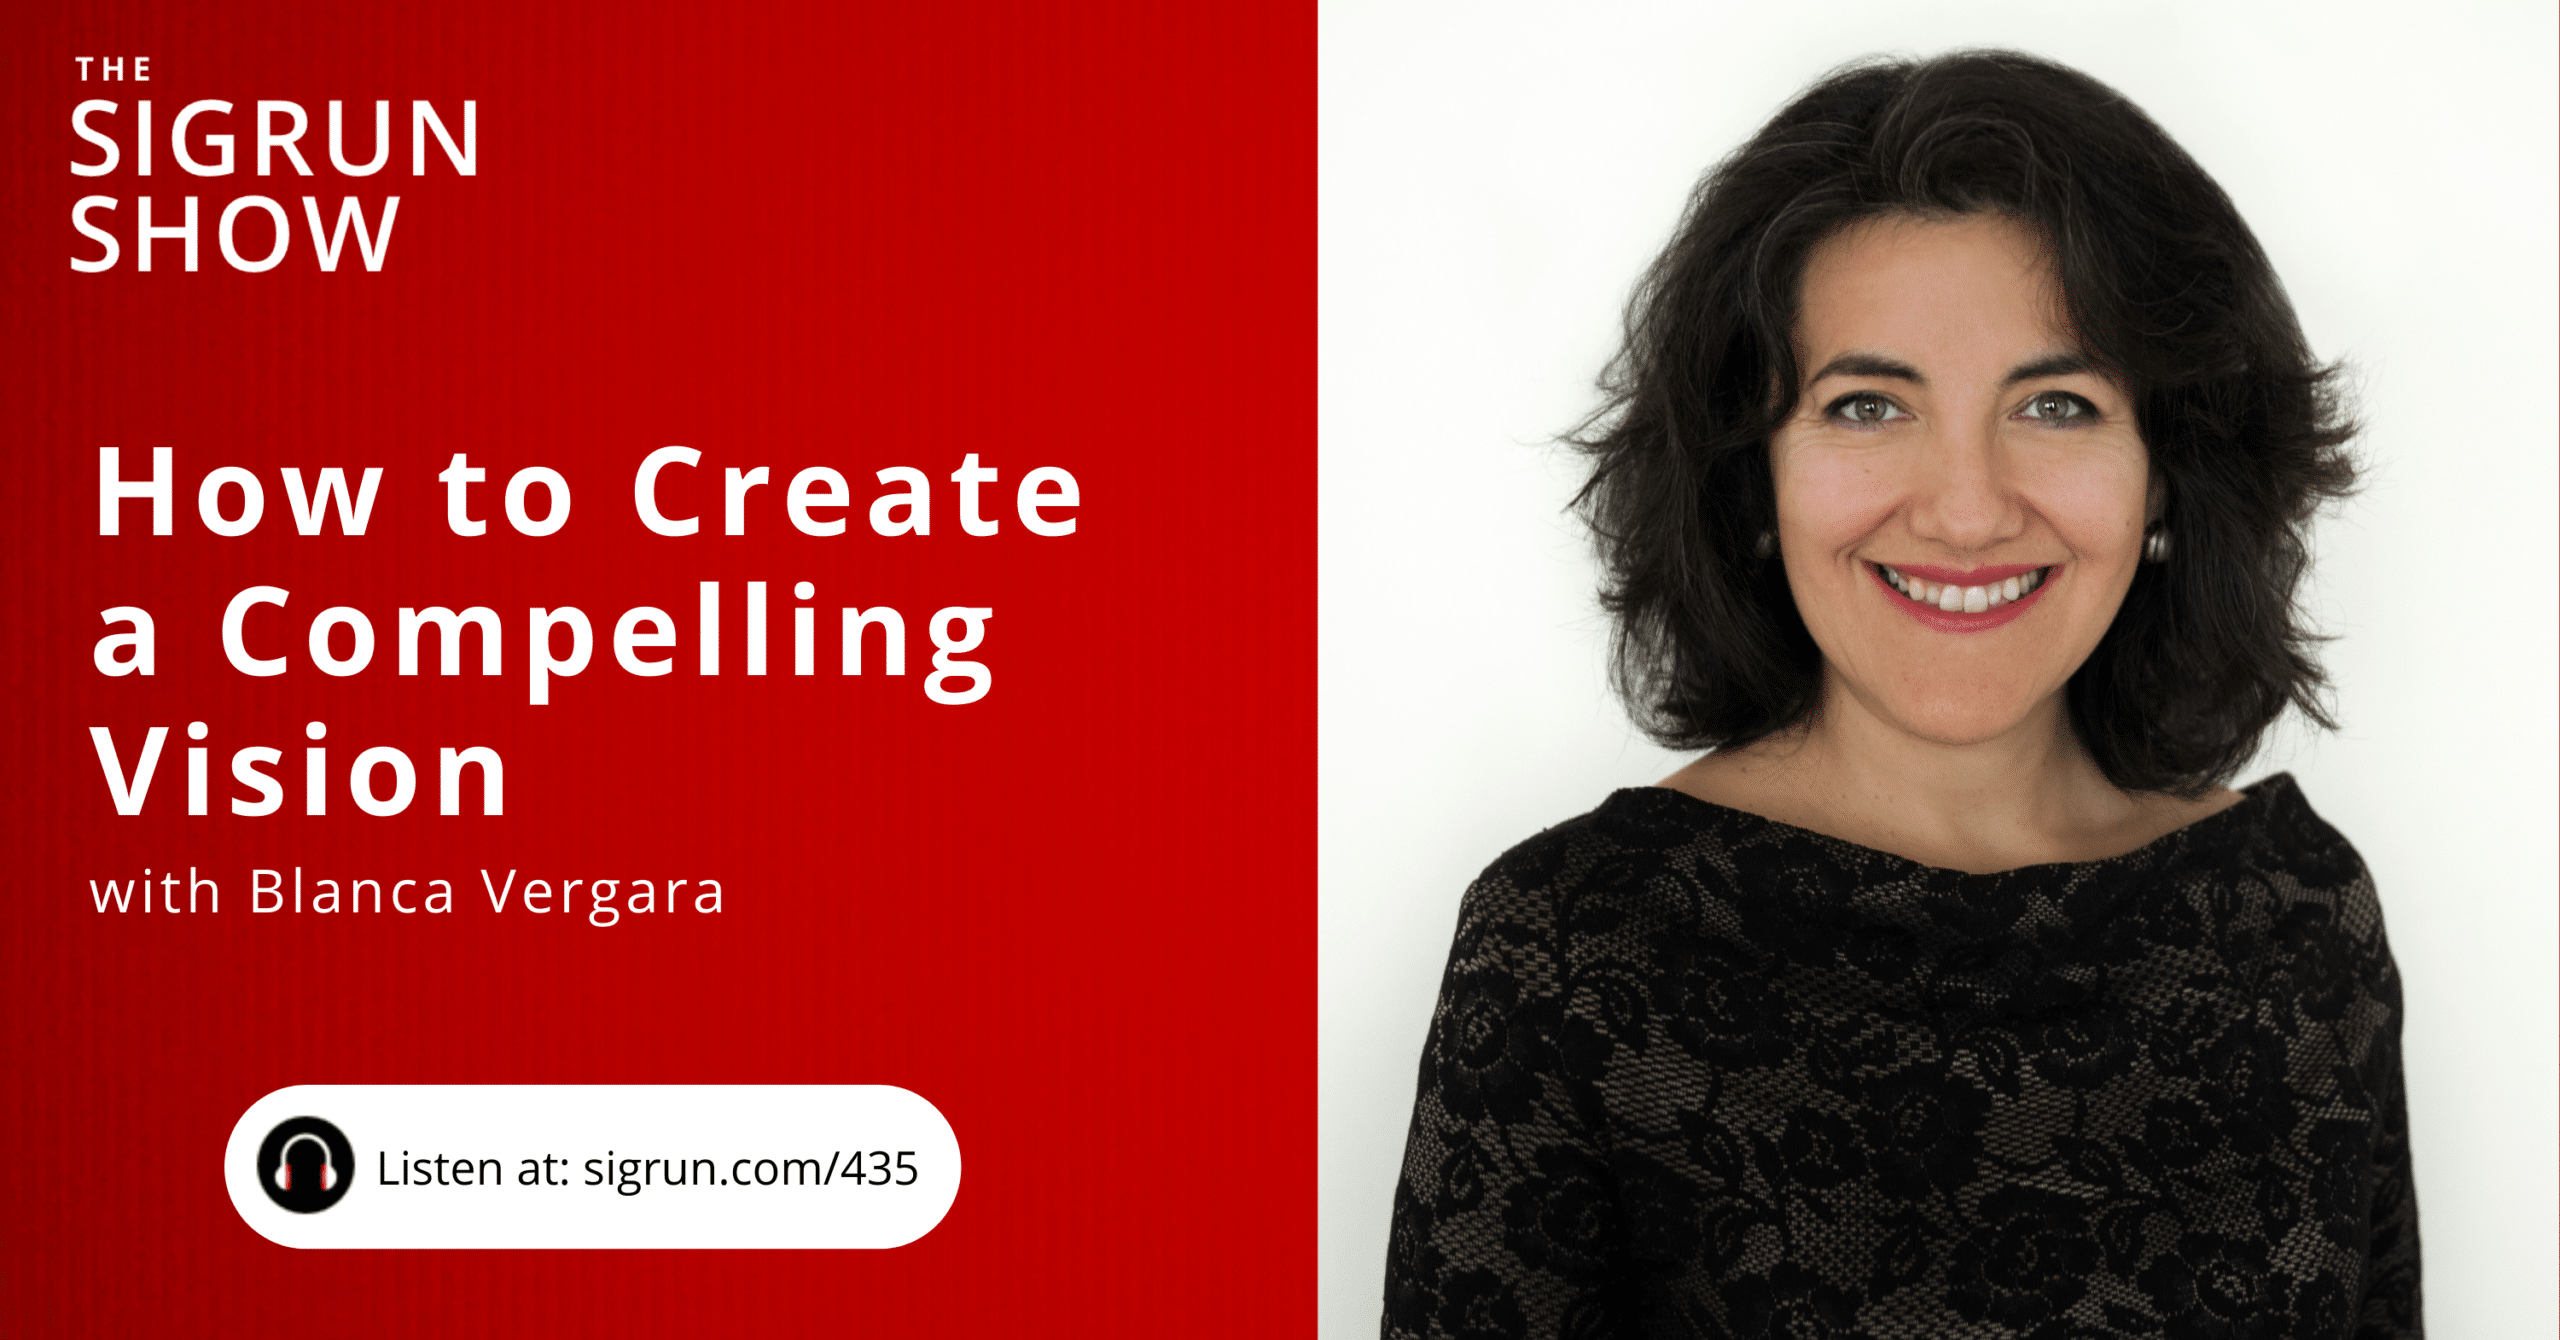 How to Create a Compelling Vision with Blanca Vergara